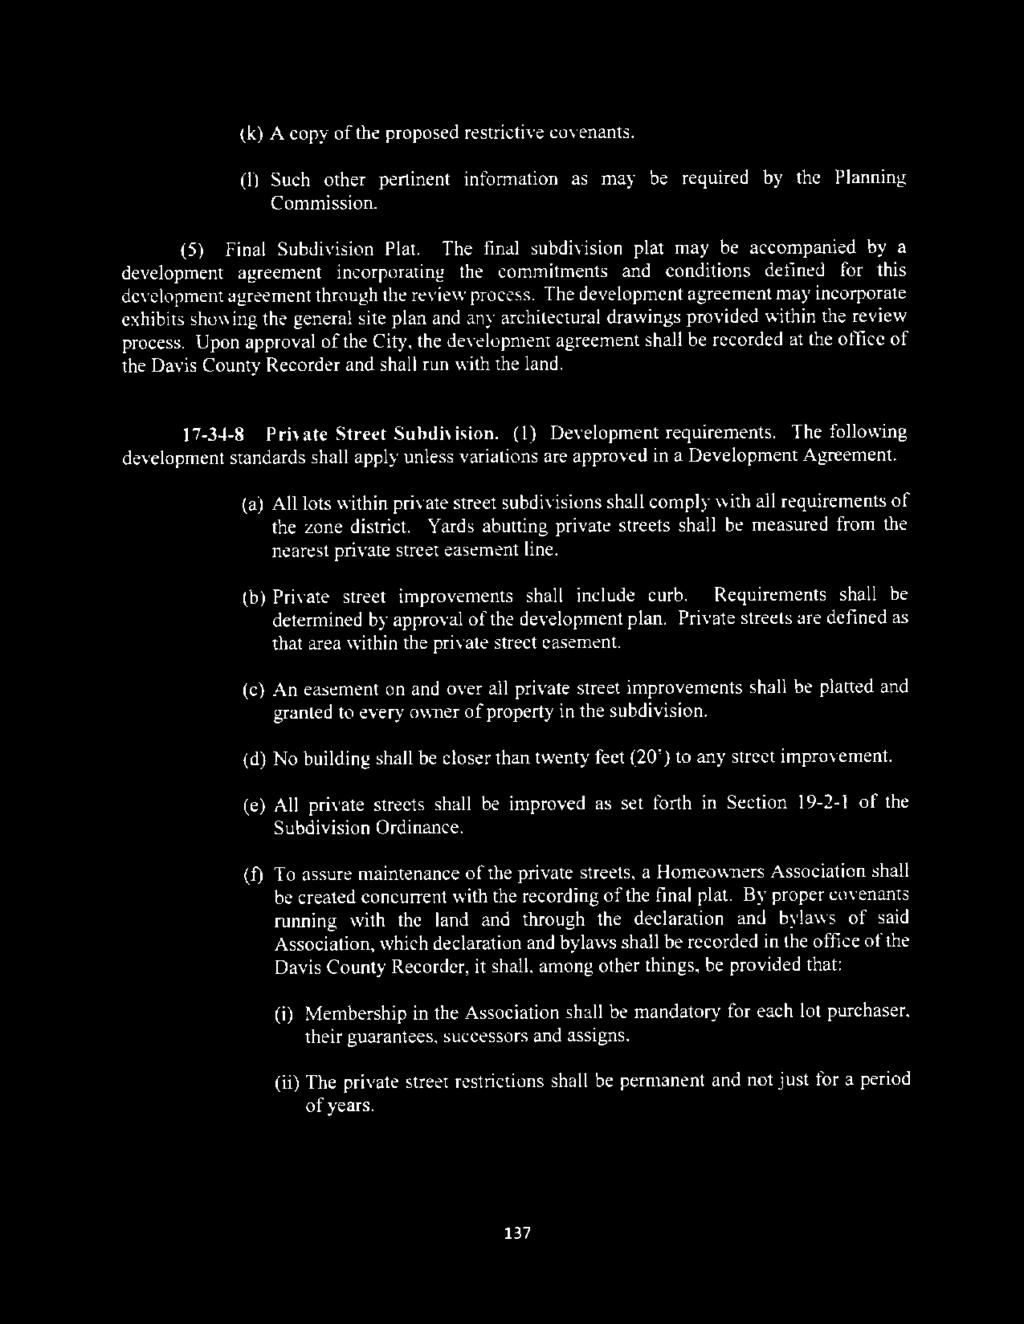 (k) A copy of the proposed restrictive covenants. (1) Such other pertinent information as may be required by the Planning Commission. (5) Final Subdivision Plat.